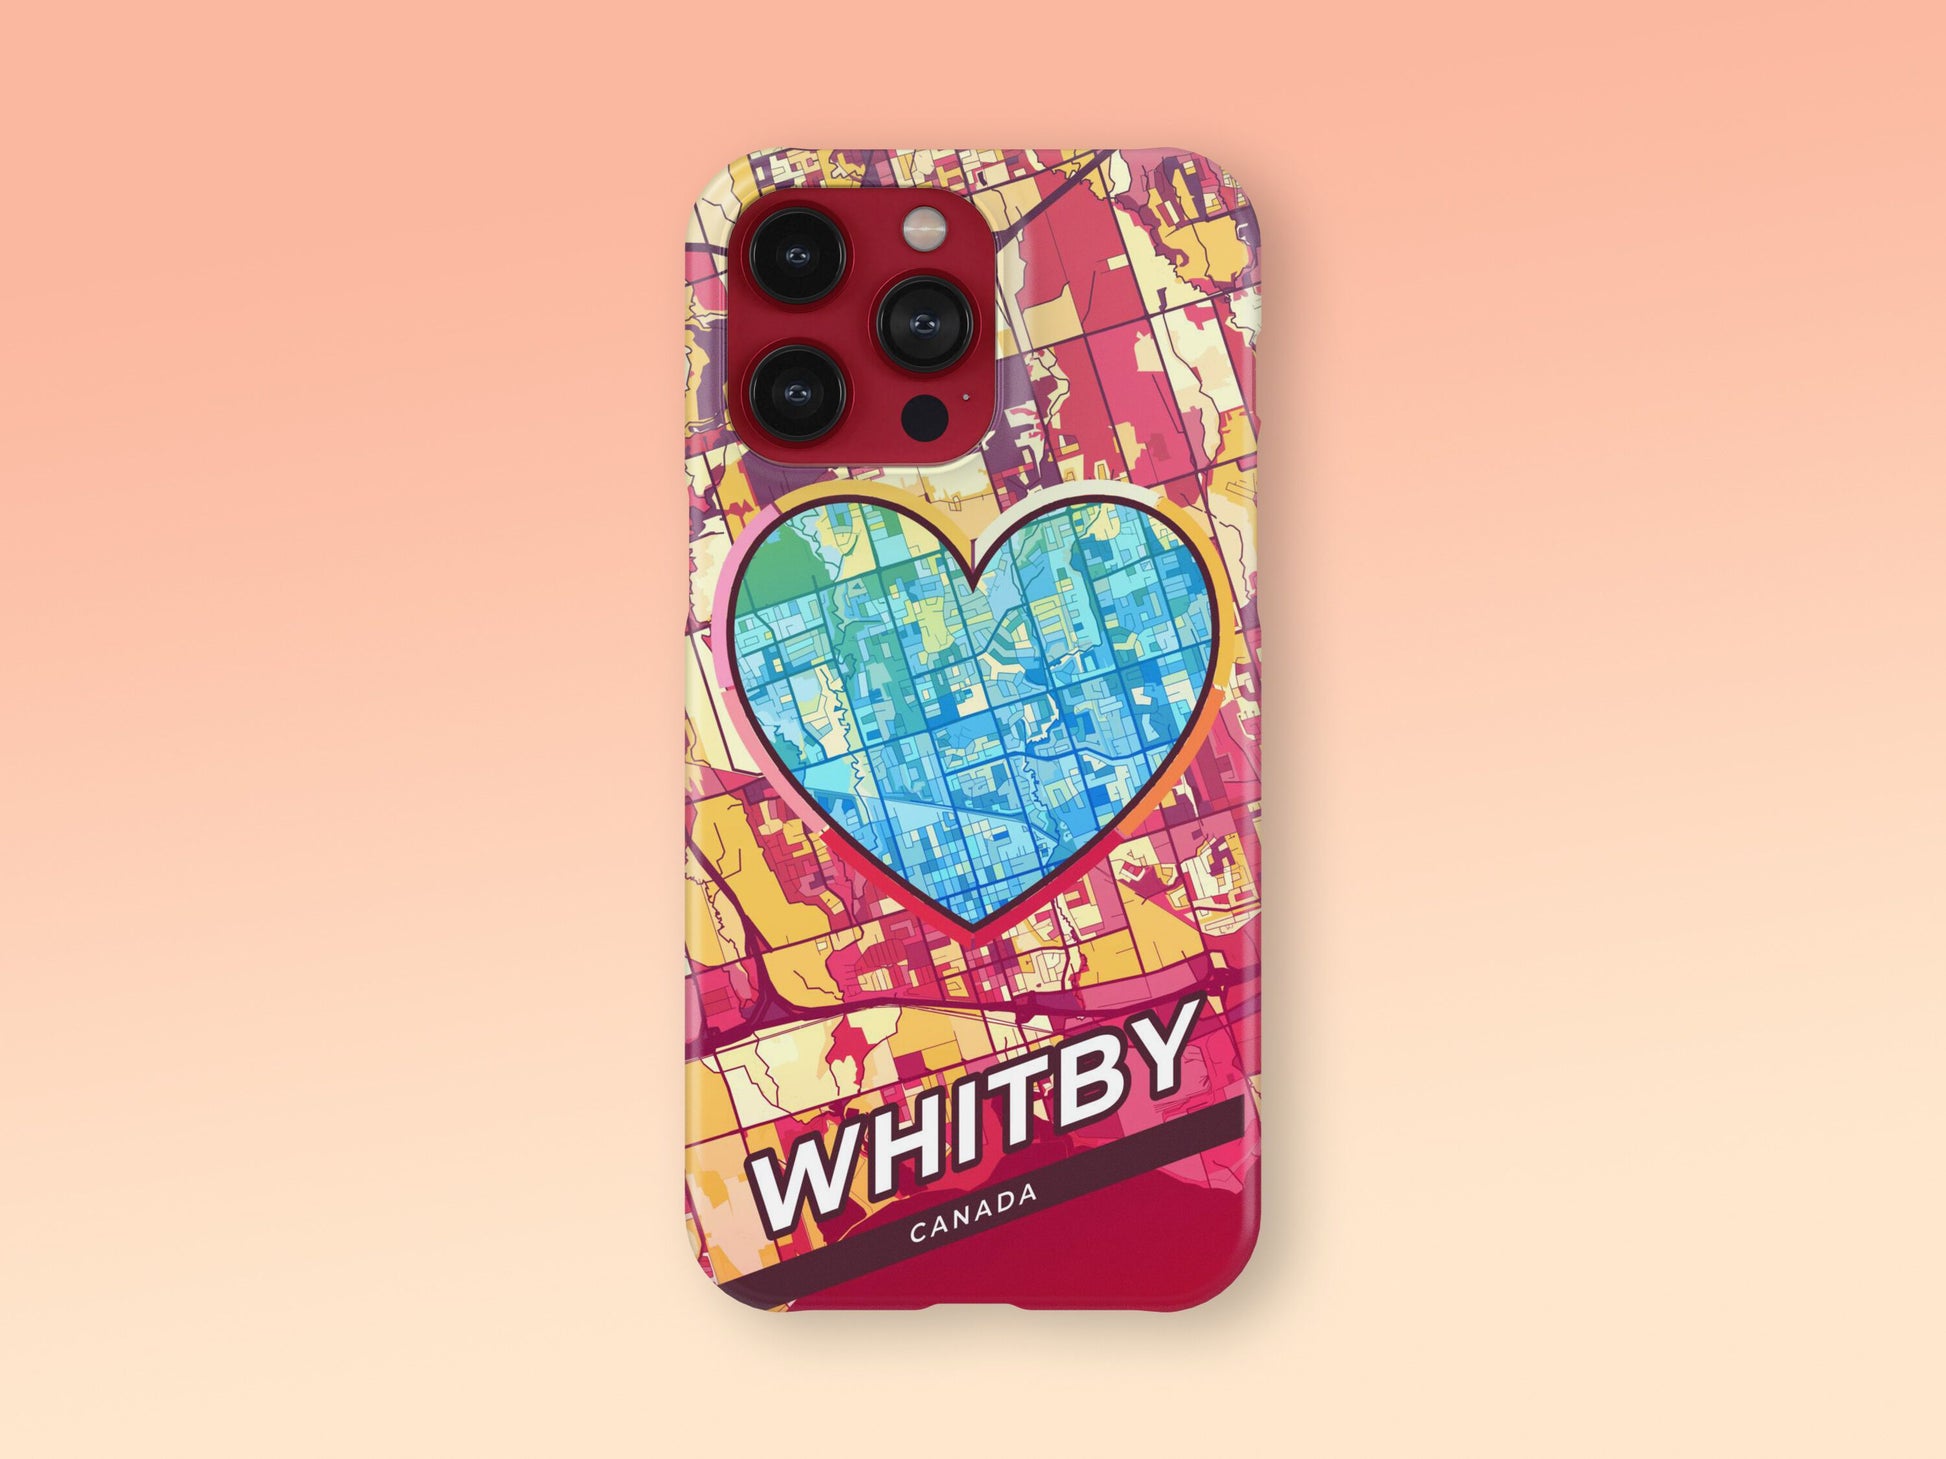 Whitby Canada slim phone case with colorful icon 2